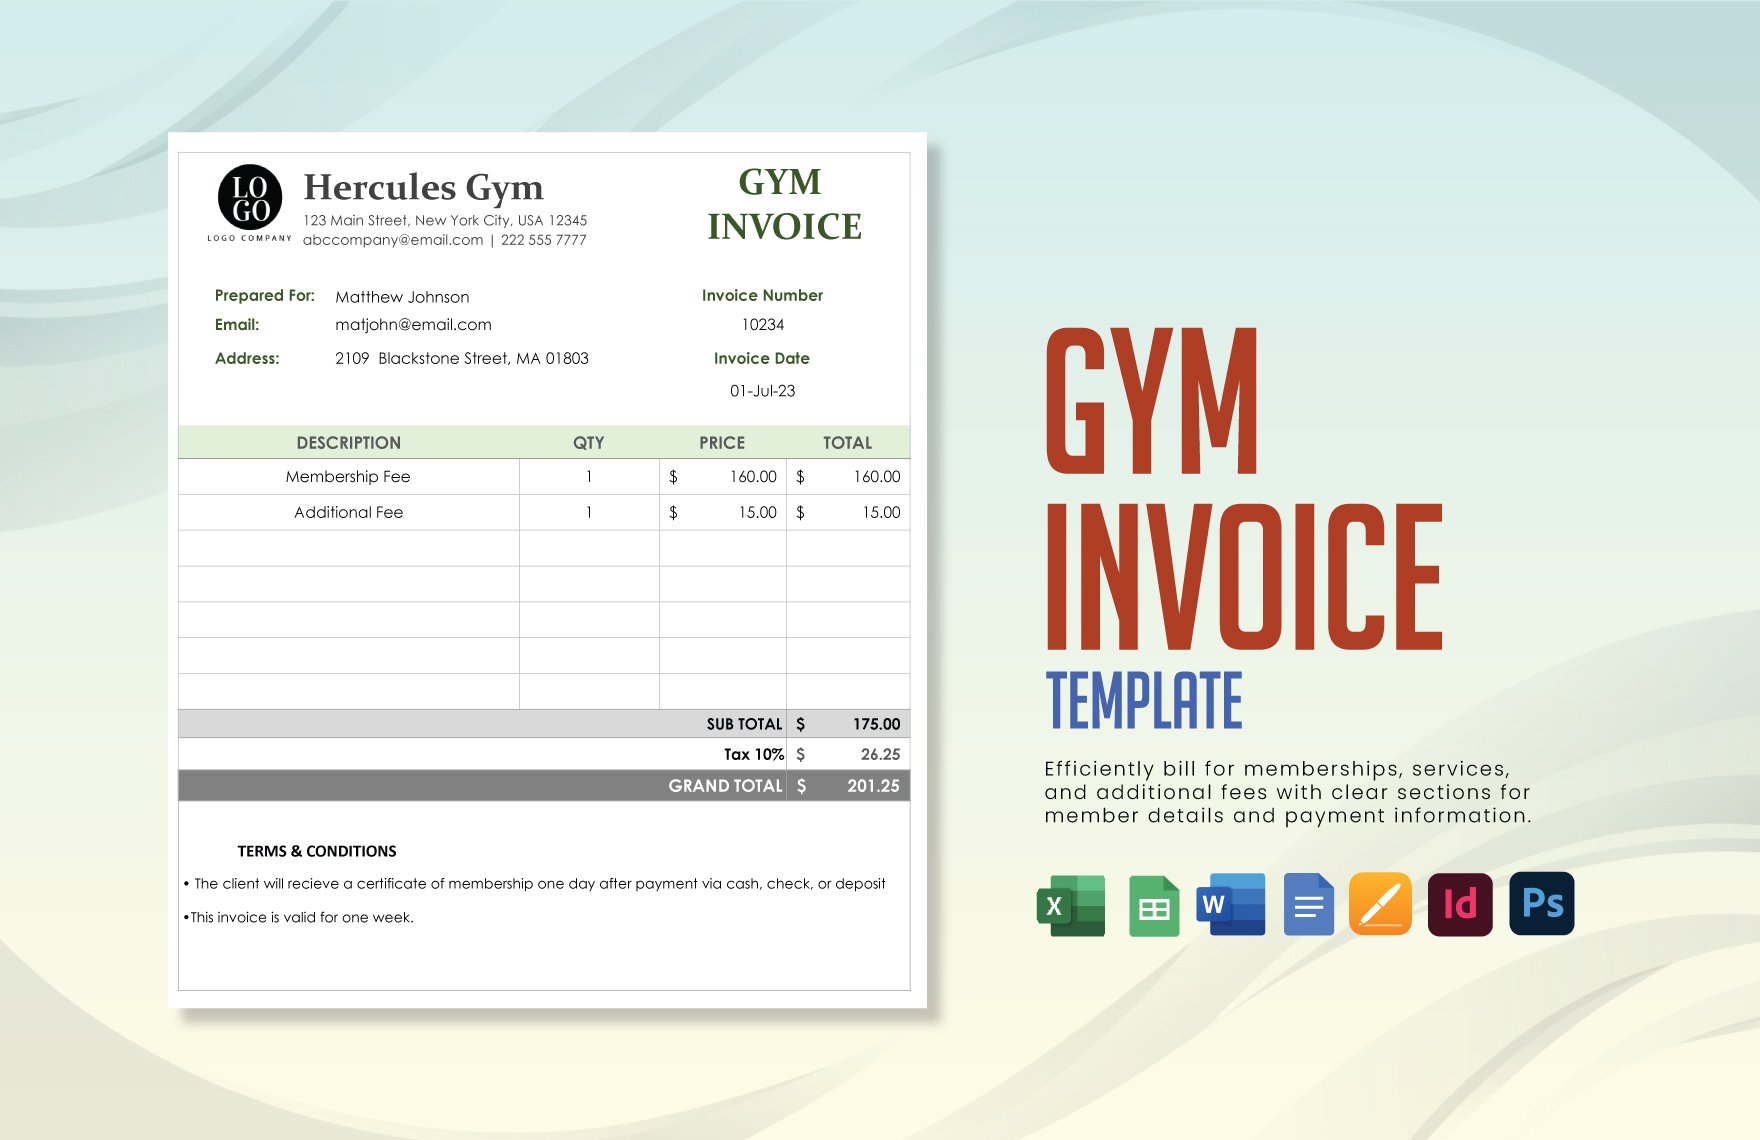 Gym Invoice Template in Word, Google Docs, Excel, Google Sheets, PSD, Apple Pages, InDesign